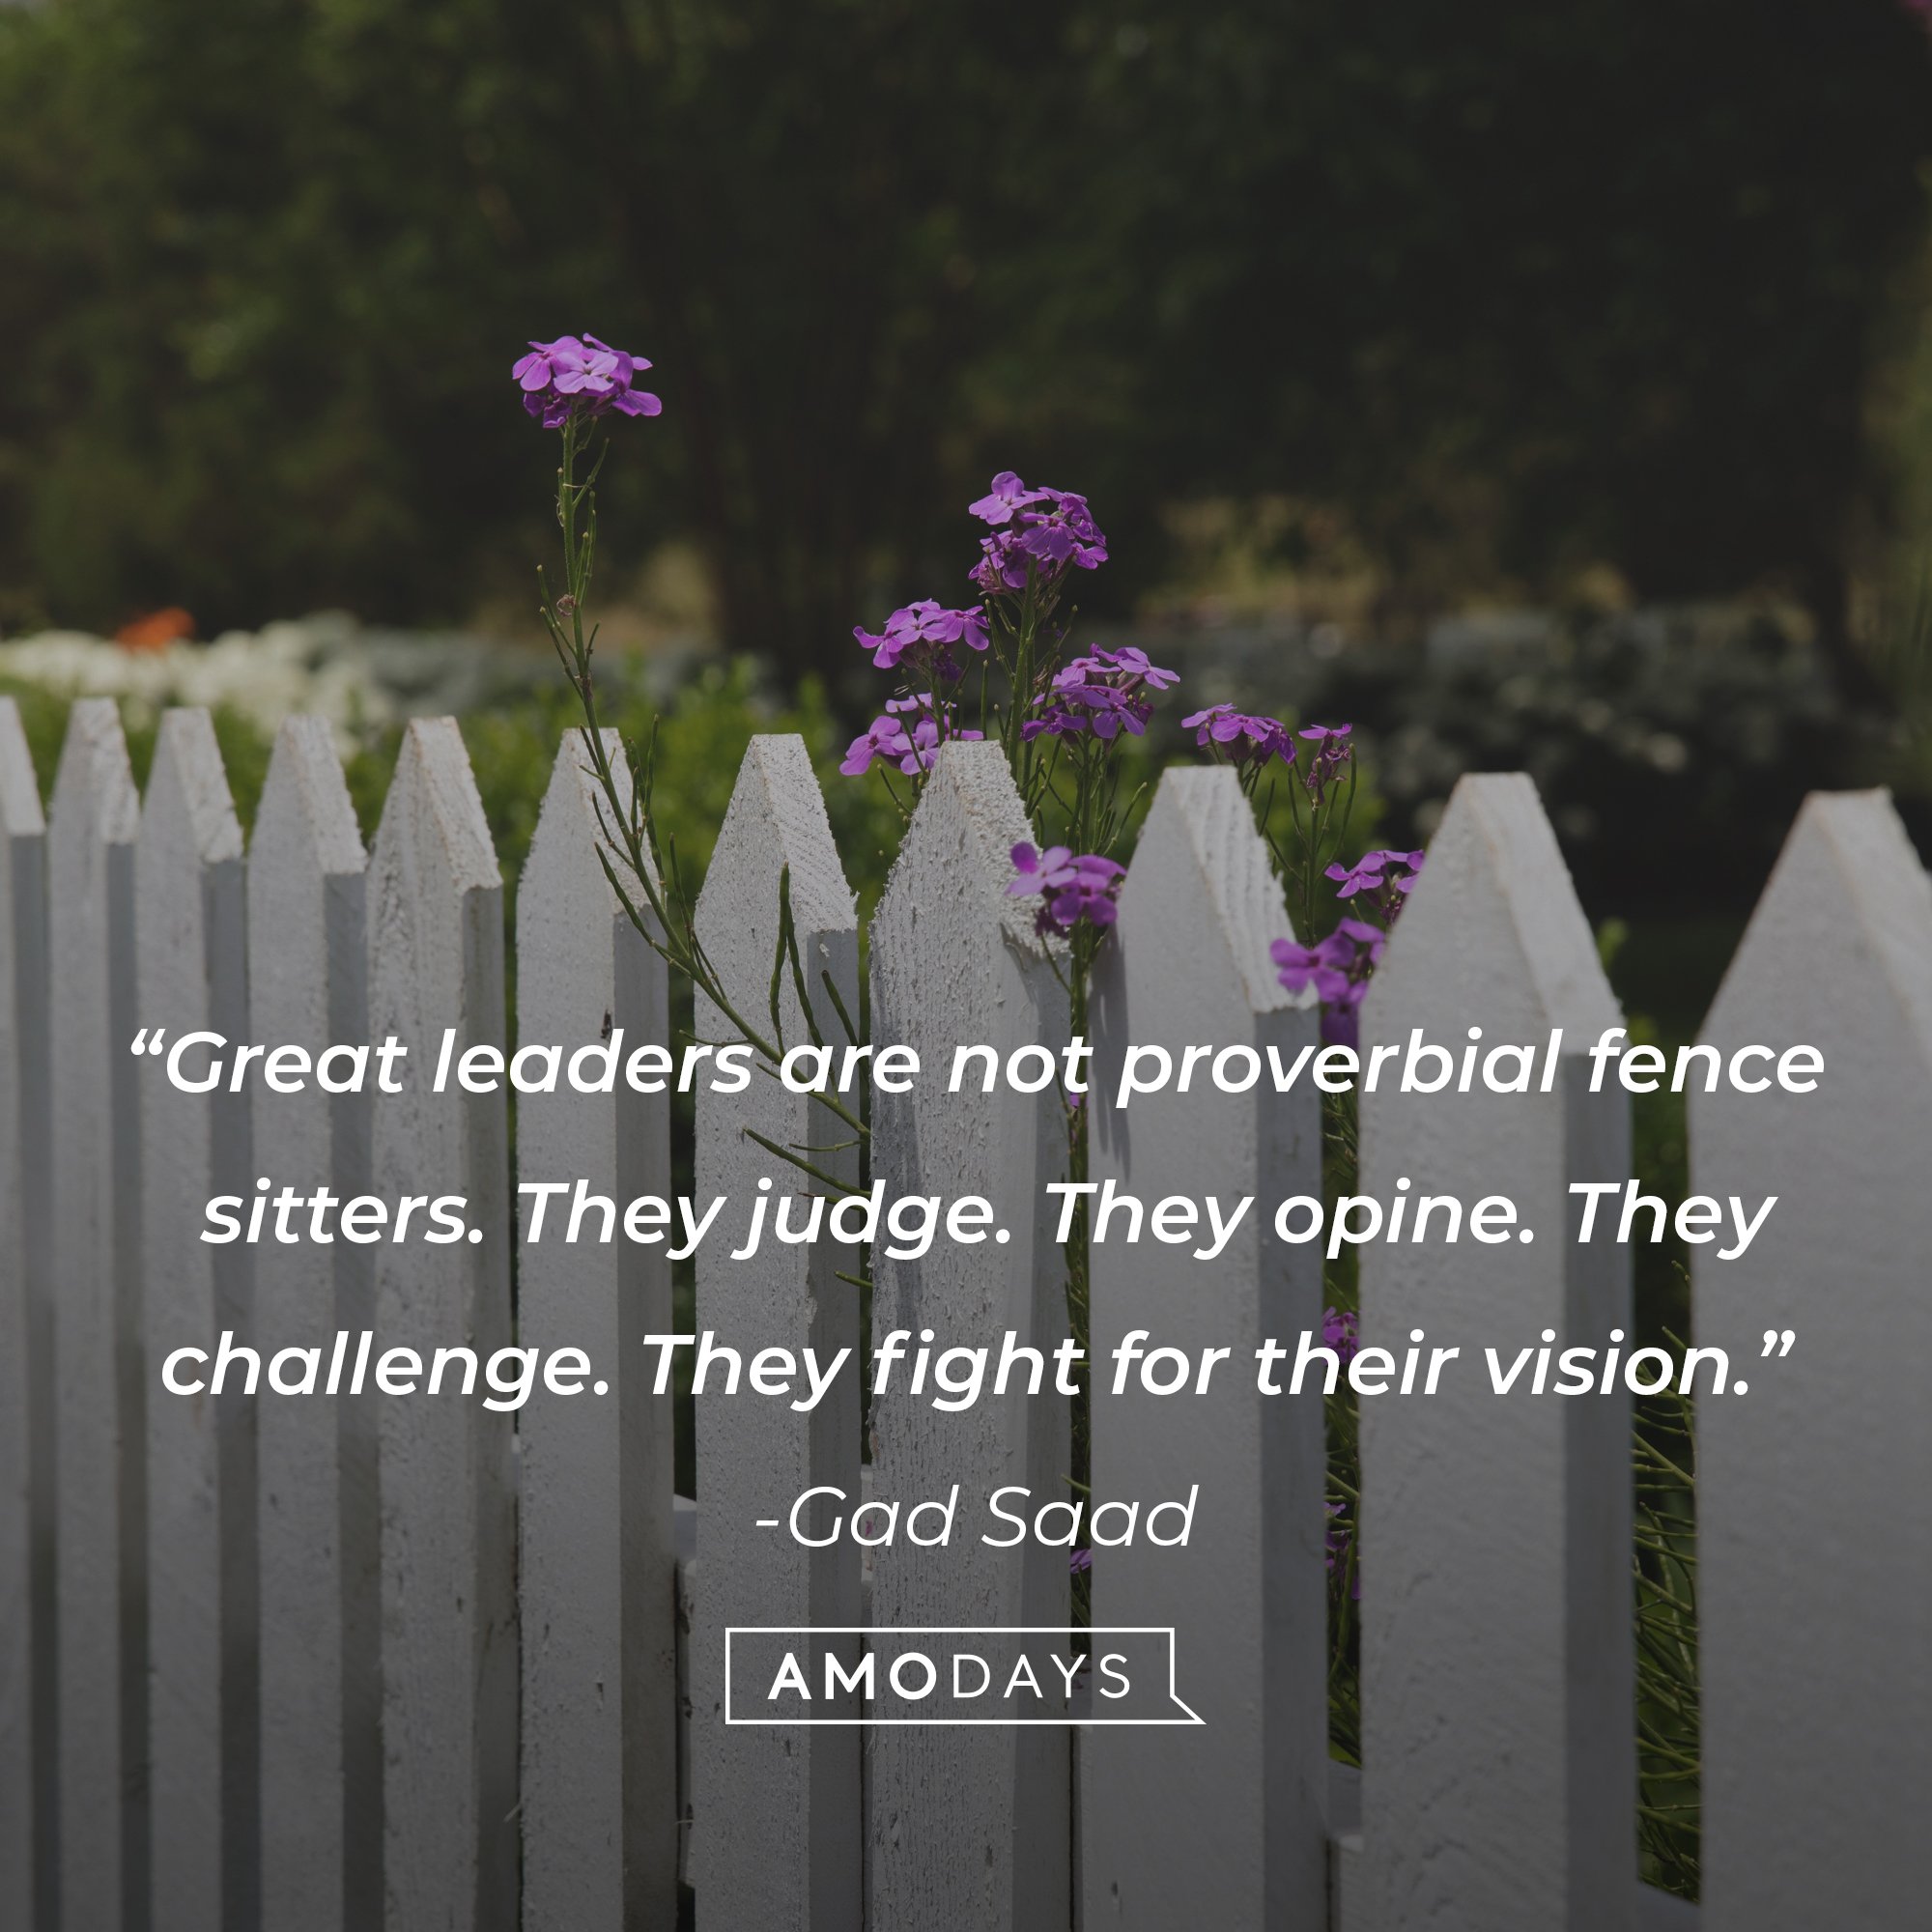 Gad Saad's quote: “Great leaders are not proverbial fence sitters. They judge. They opine. They challenge. They fight for their vision.” | Image: AmoDays